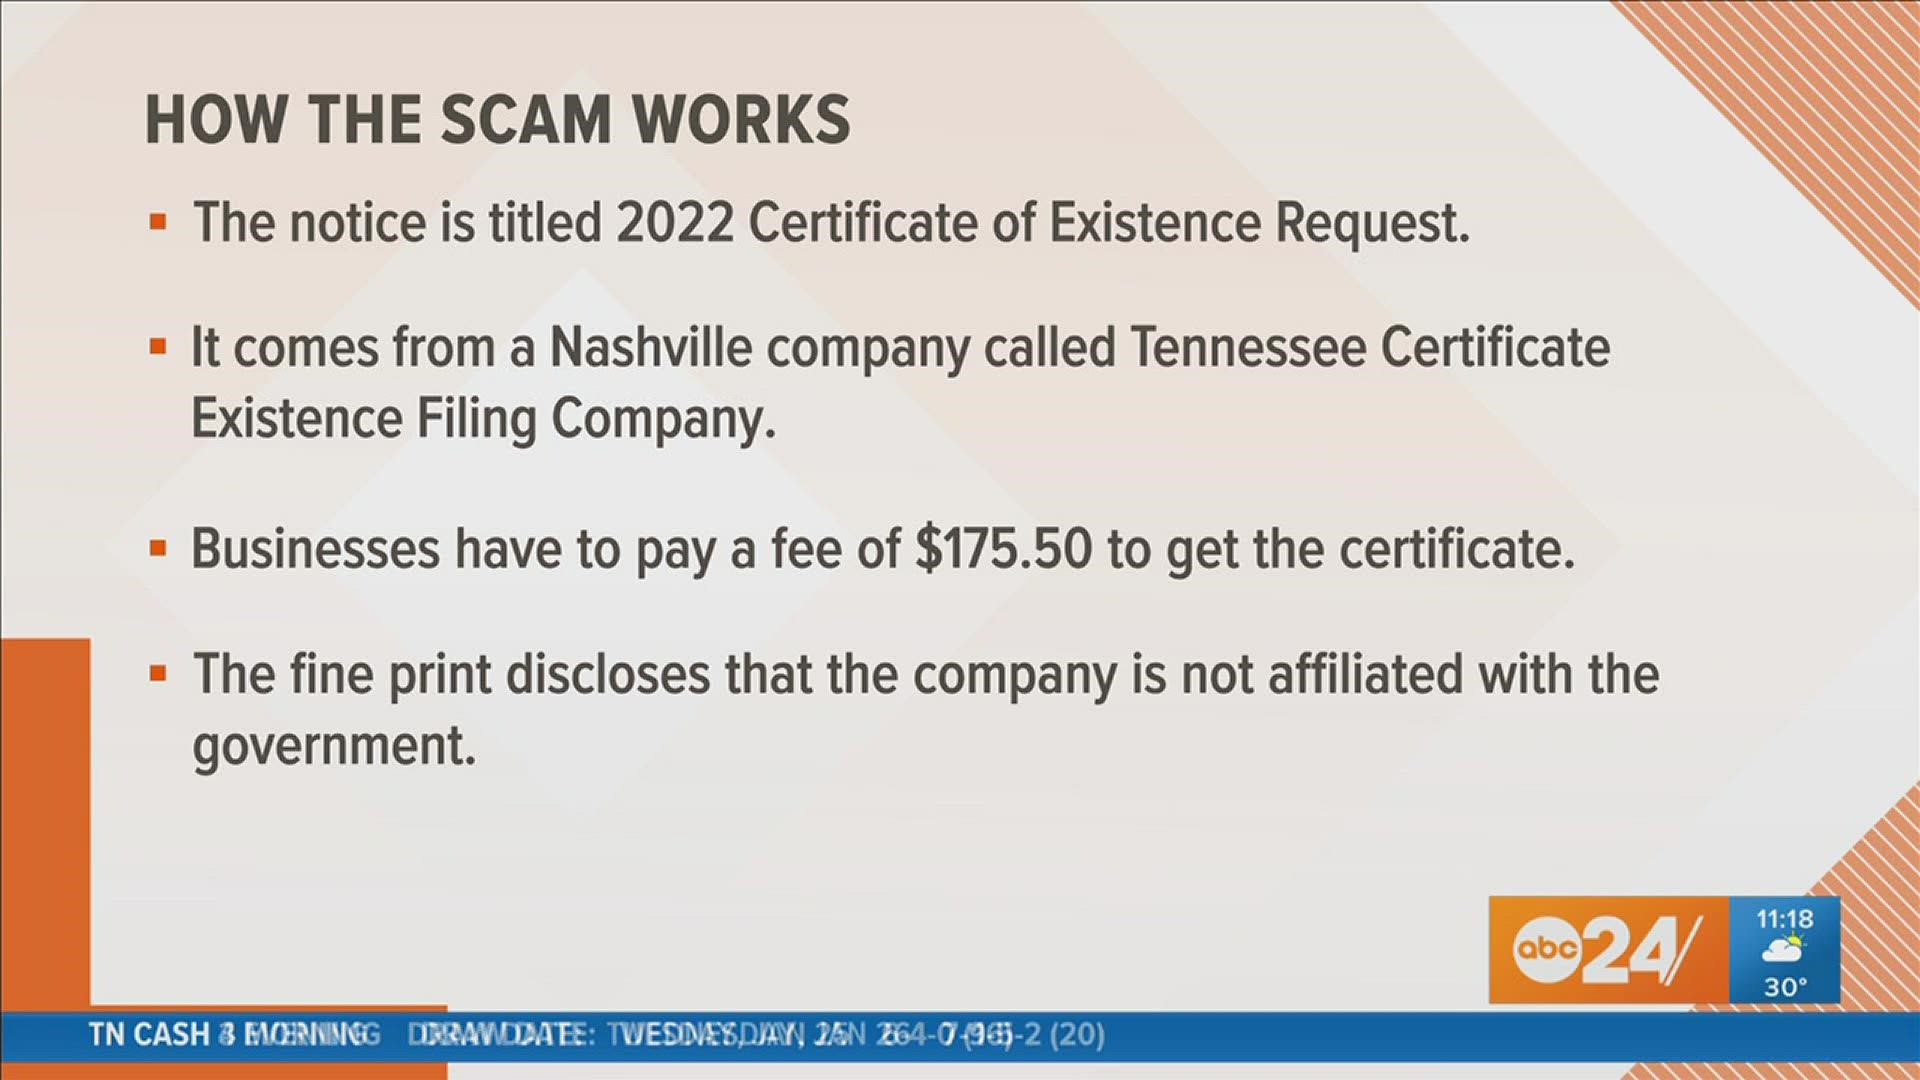 Randy Hutchinson with the Better Business Bureau of the Mid-South spoke with ABC 24 Wednesday about the alert from the Tennessee Secretary of State.